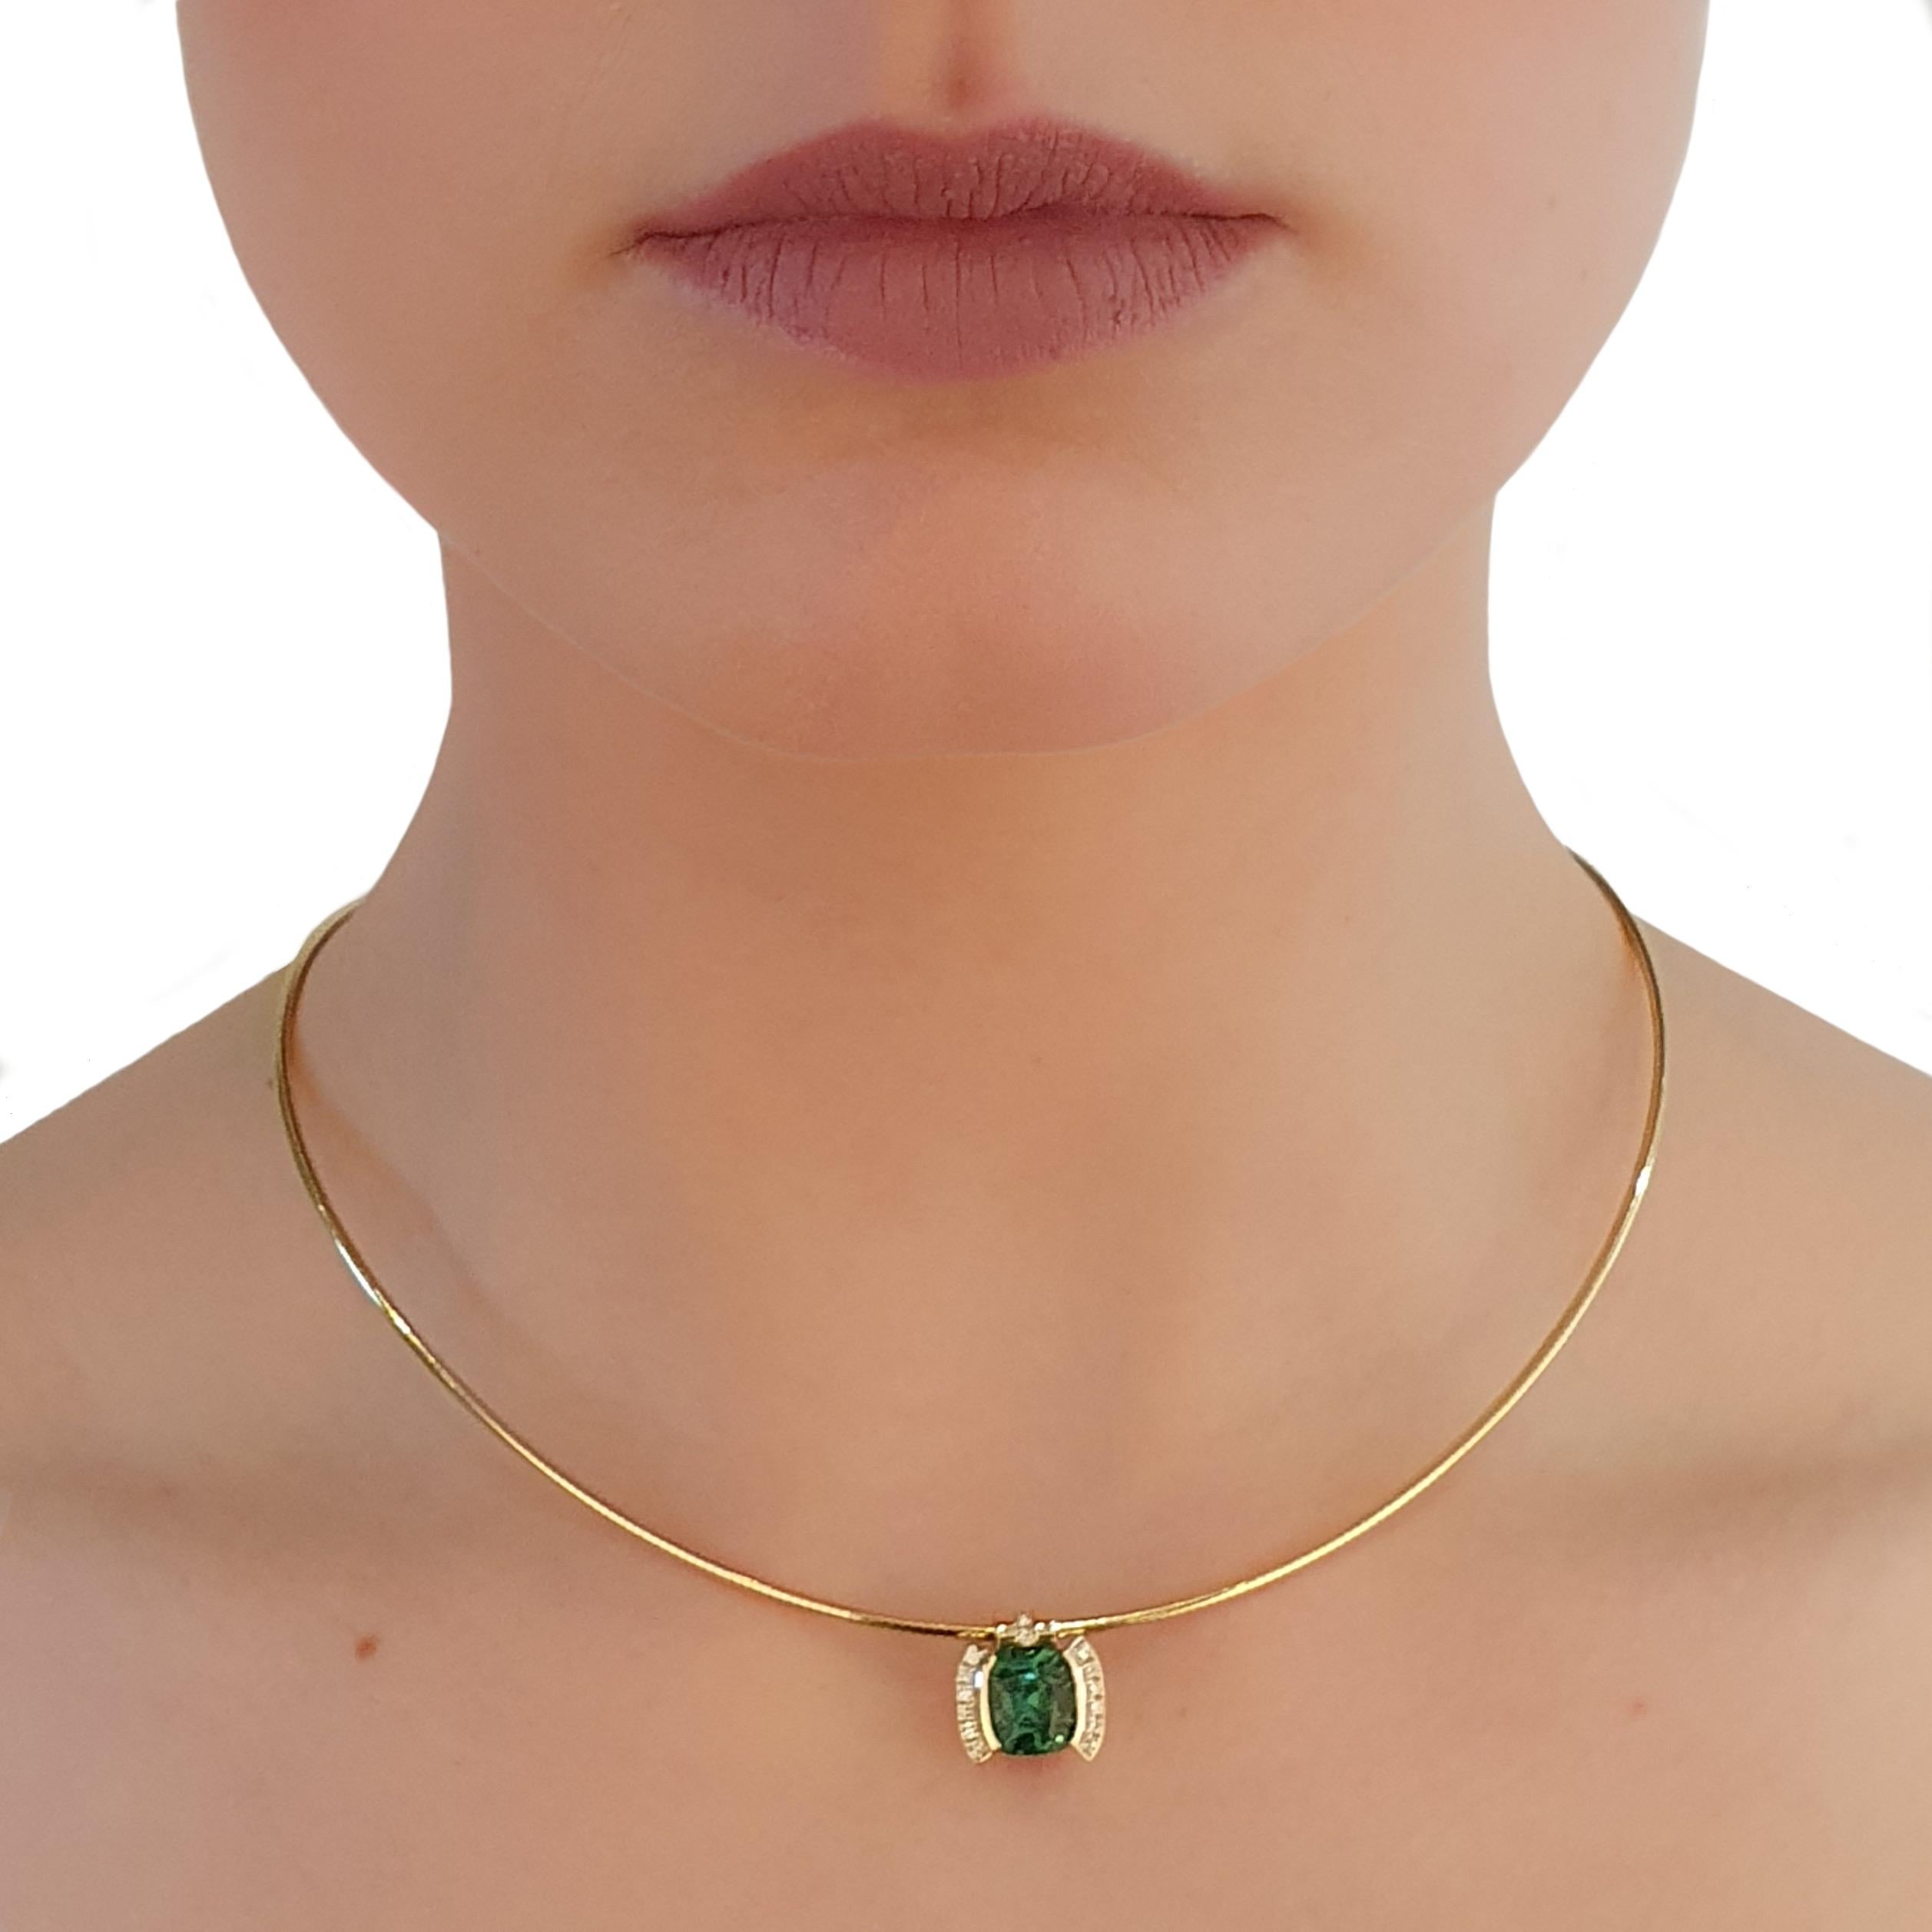 This is a green Tourmaline of magnificent quality, set in a yellow gold pendant of 18K gold. In total, there are also 16 loupe clean Brilliant-cut Diamonds with a total weight of 0,16 ct. in the pendant. 
Please note that the necklace is not